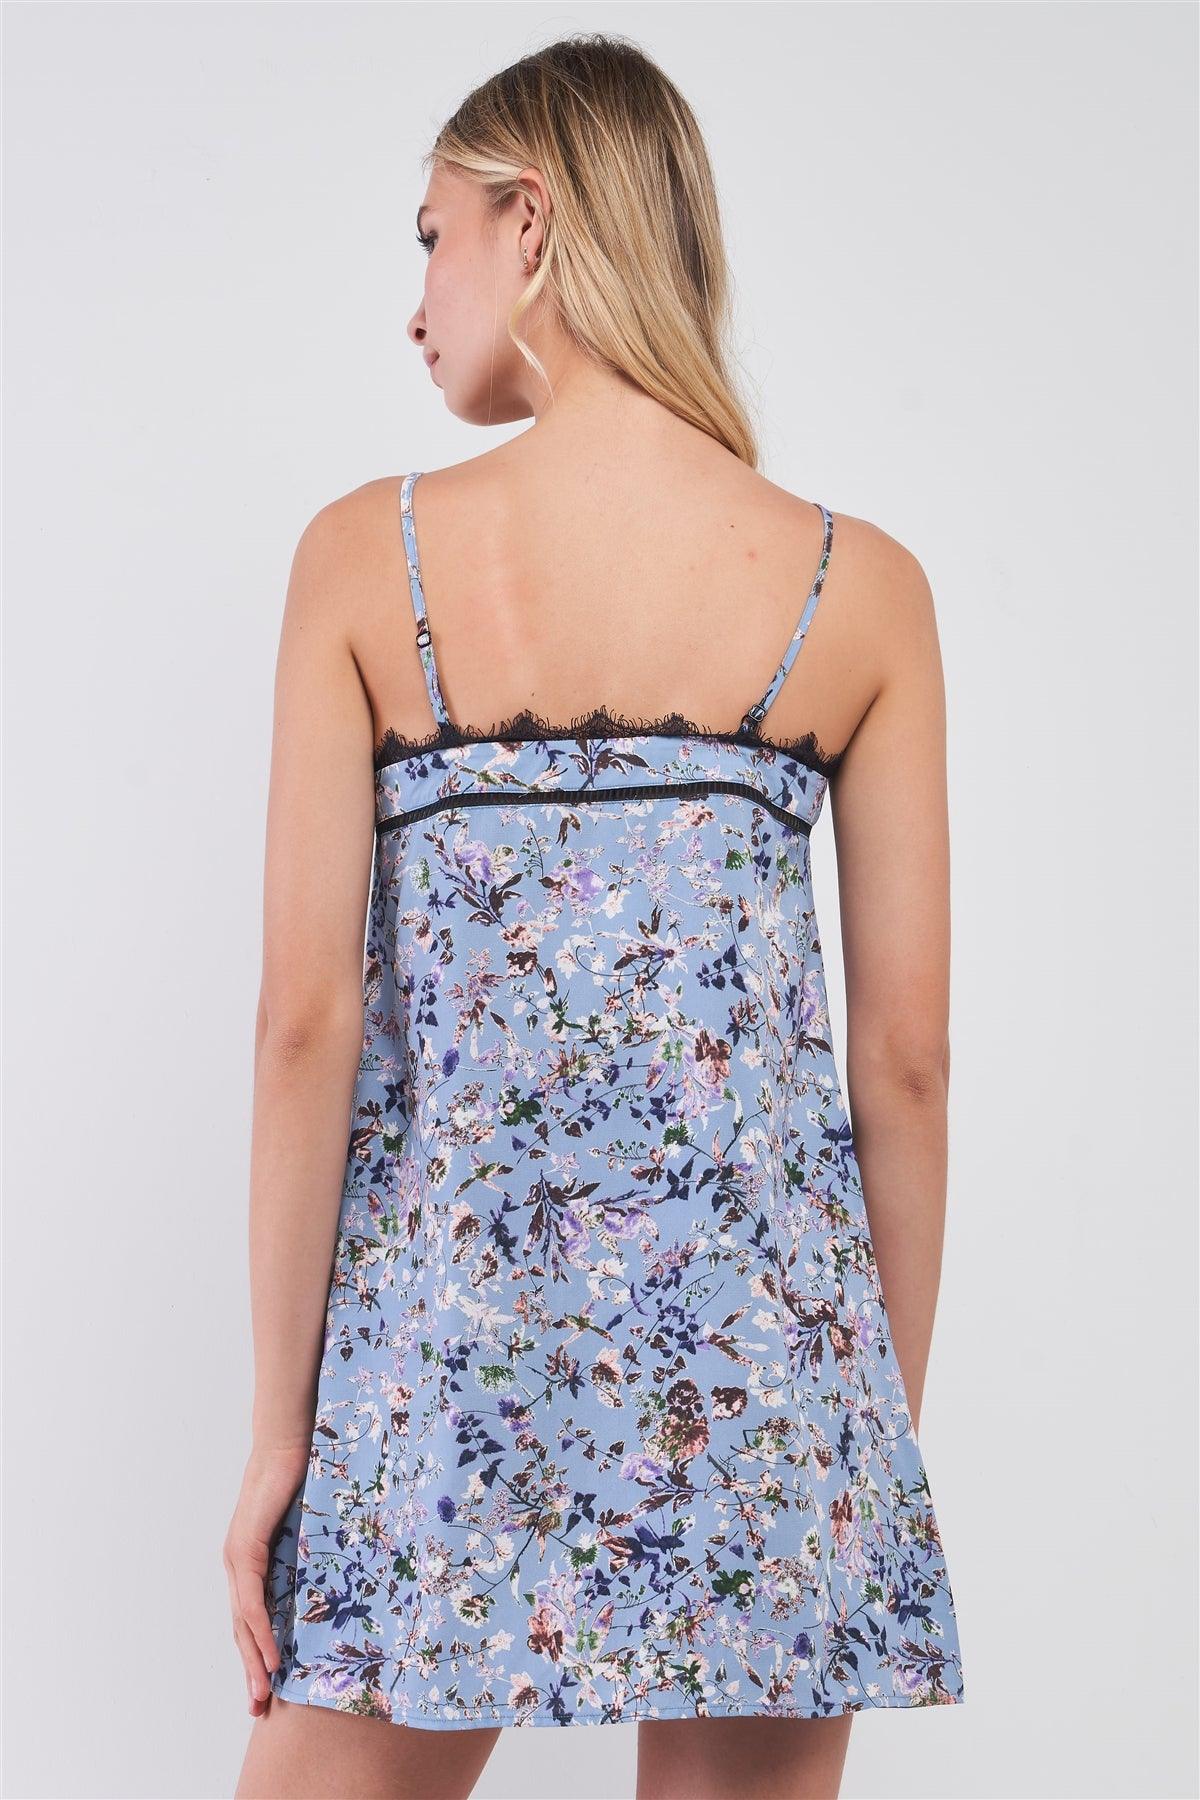 Spring Blue Floral Sleeveless V-Neck Lace Trim Button-Down Front Mini Dress /1-2-2-1